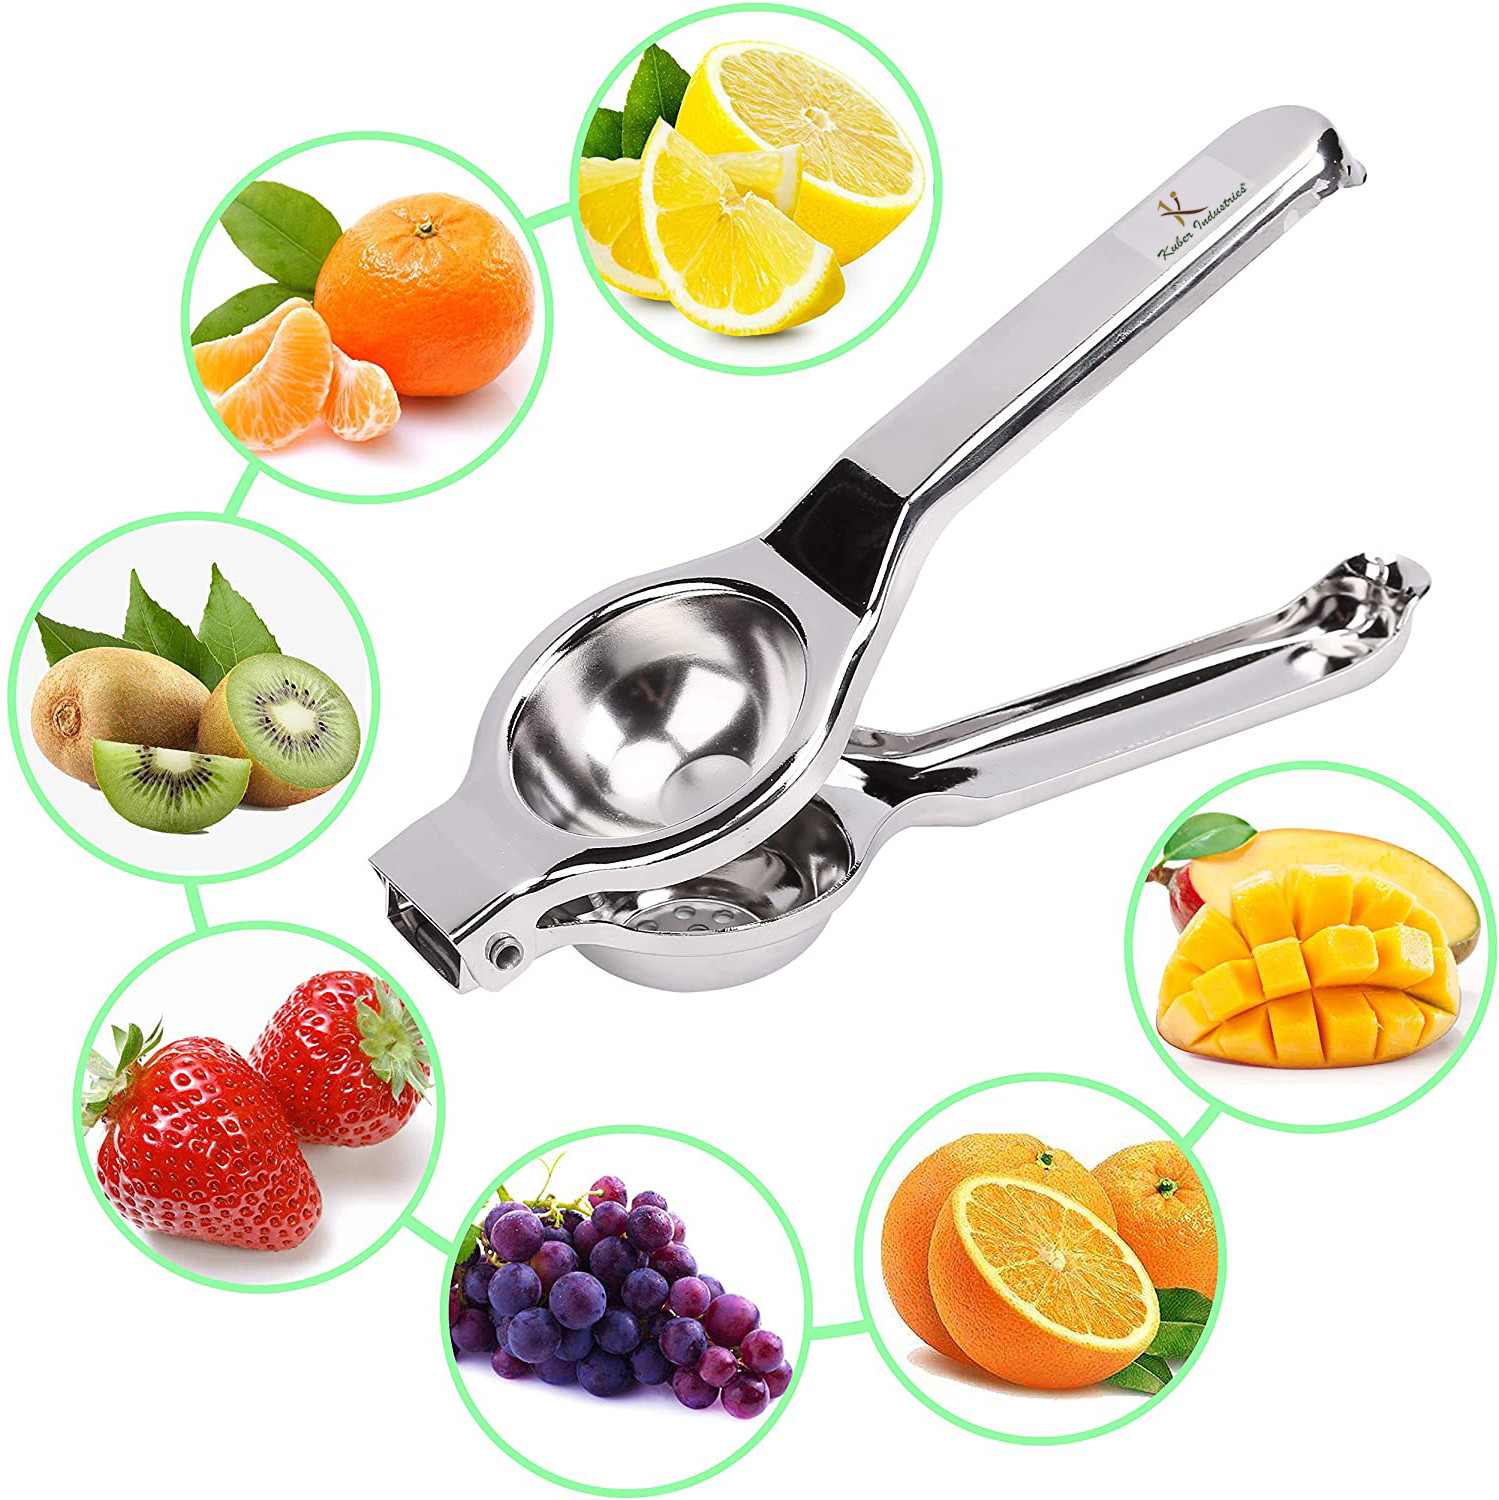 Kuber Industries Super Stainless Steel Lemon Squeezer with Attached Bottle Opener (Silver)-KUBMRT11435